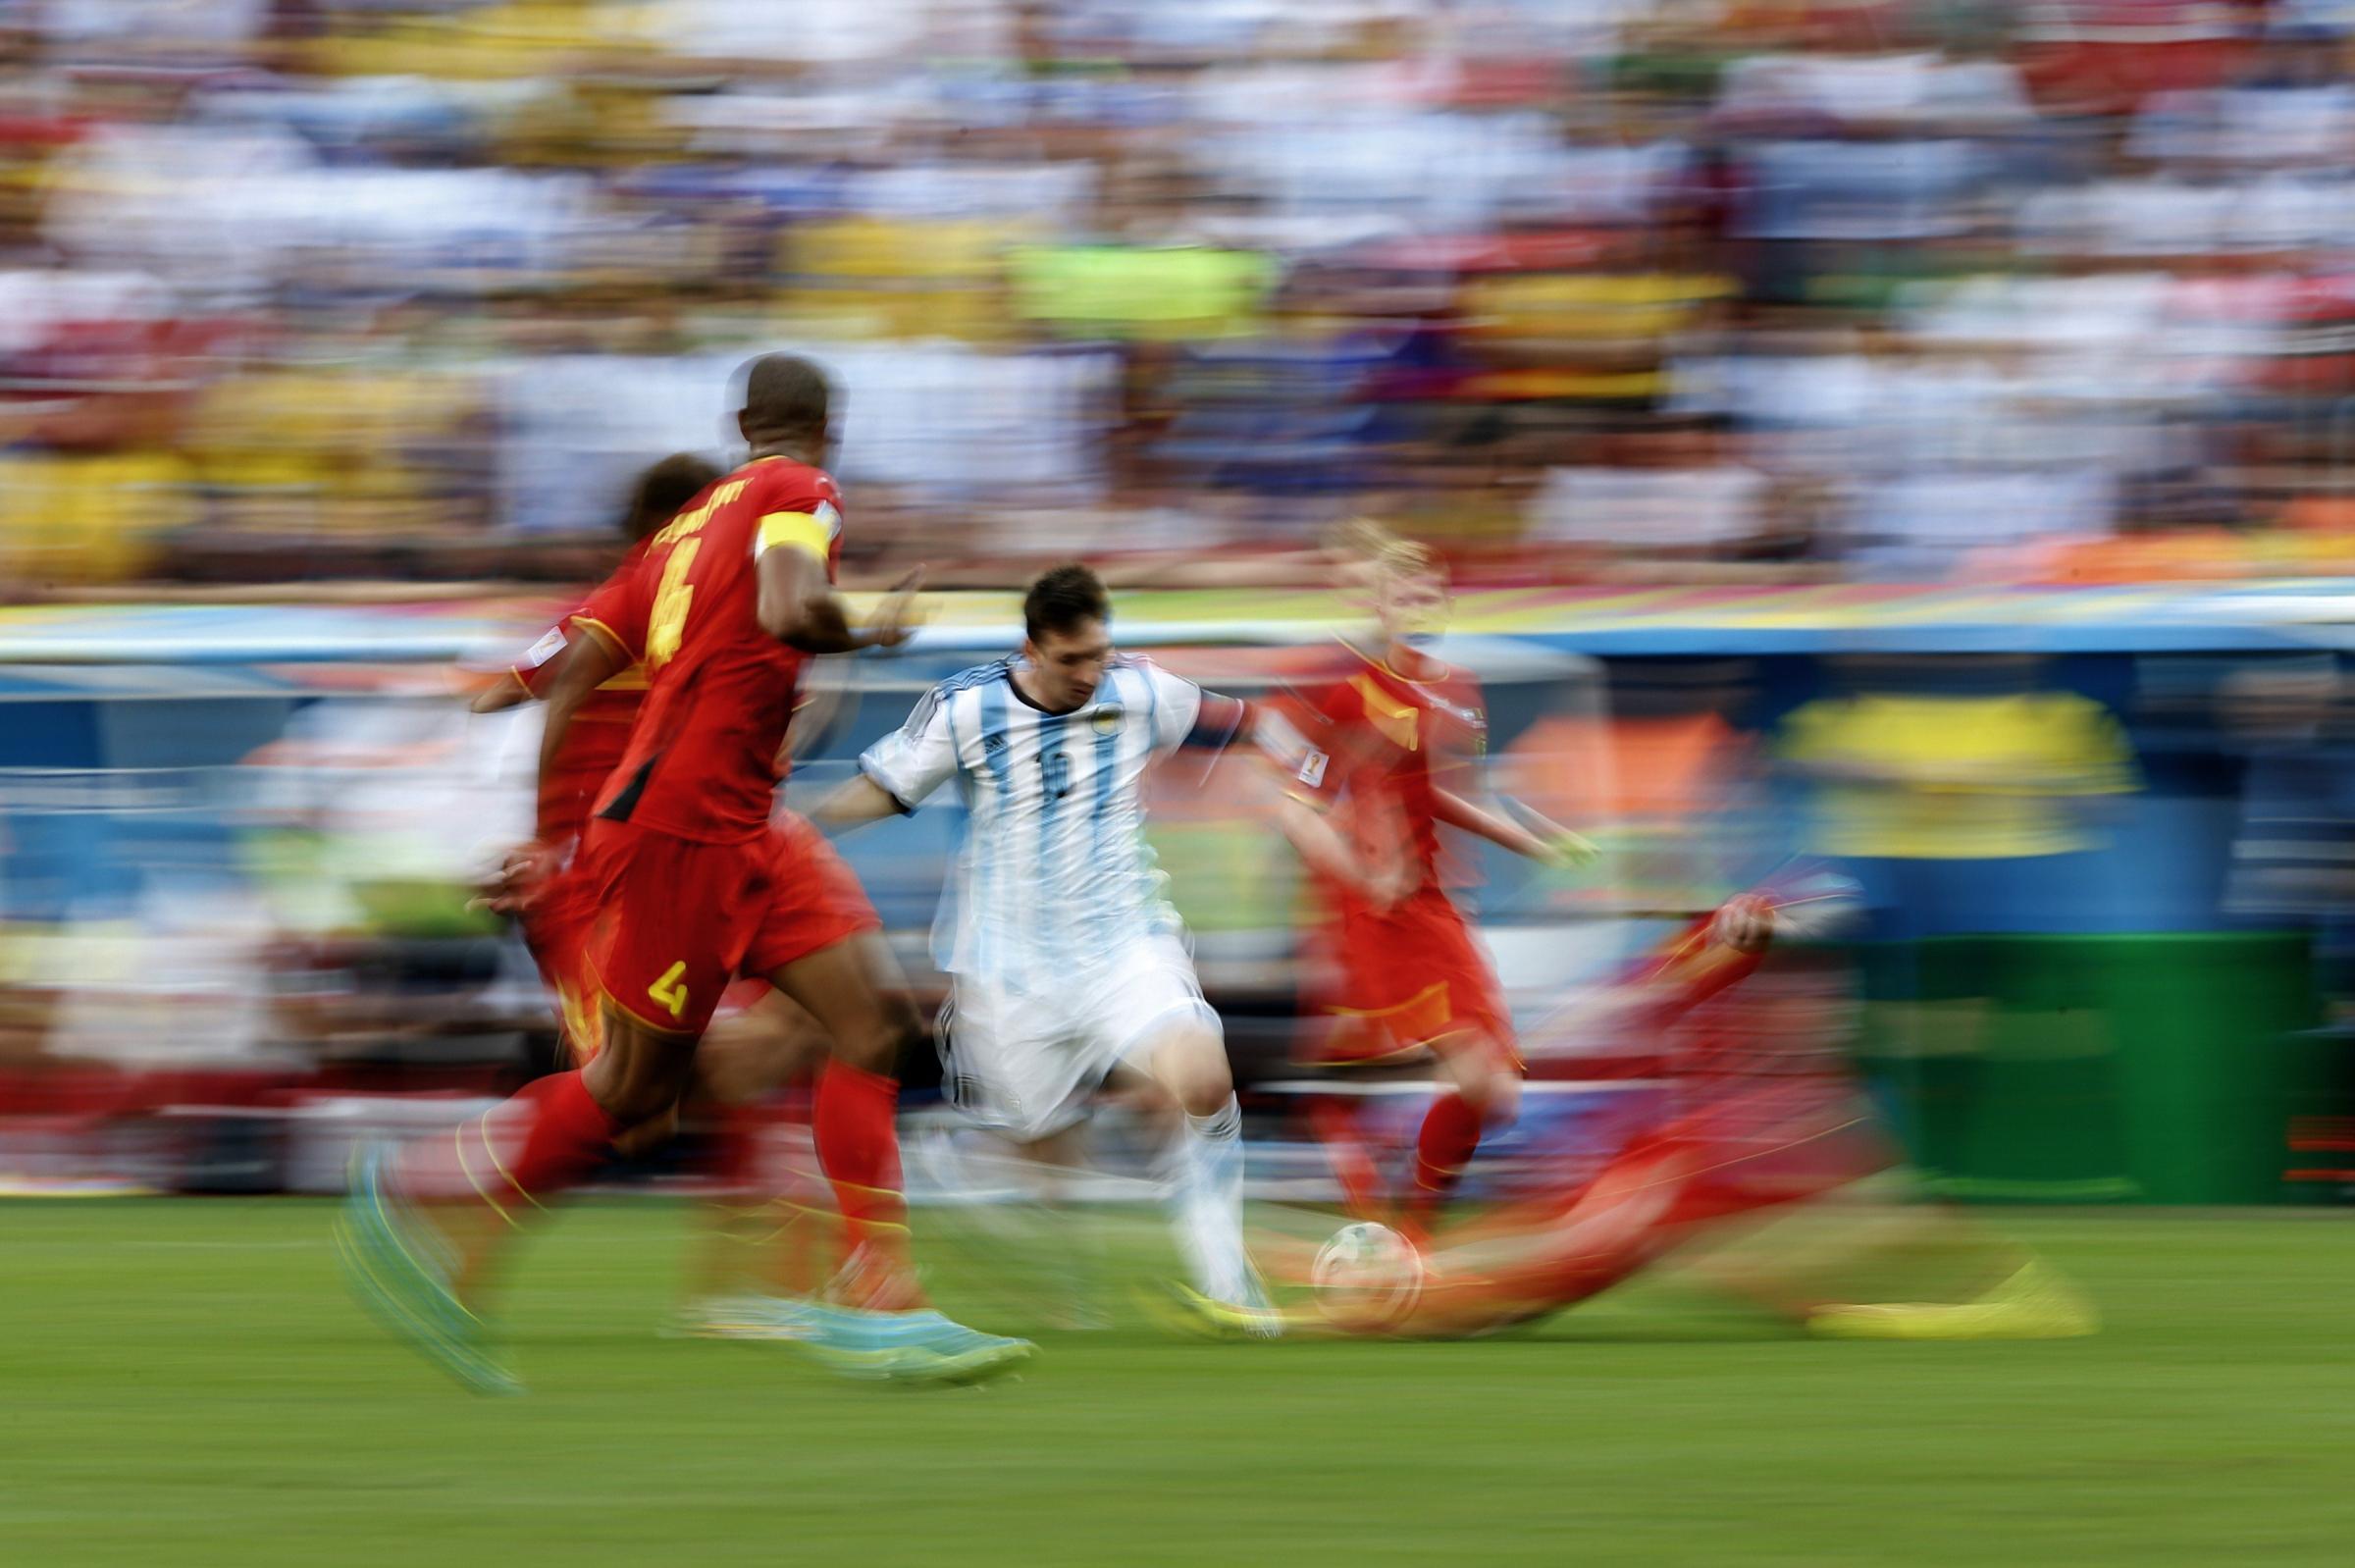 Argentina's Lionel Messi vies for the ball during a quarter-final football match between Argentina and Belgium at the Mane Garrincha National Stadium in Brasilia during the 2014 FIFA World Cup on July 5, 2014.